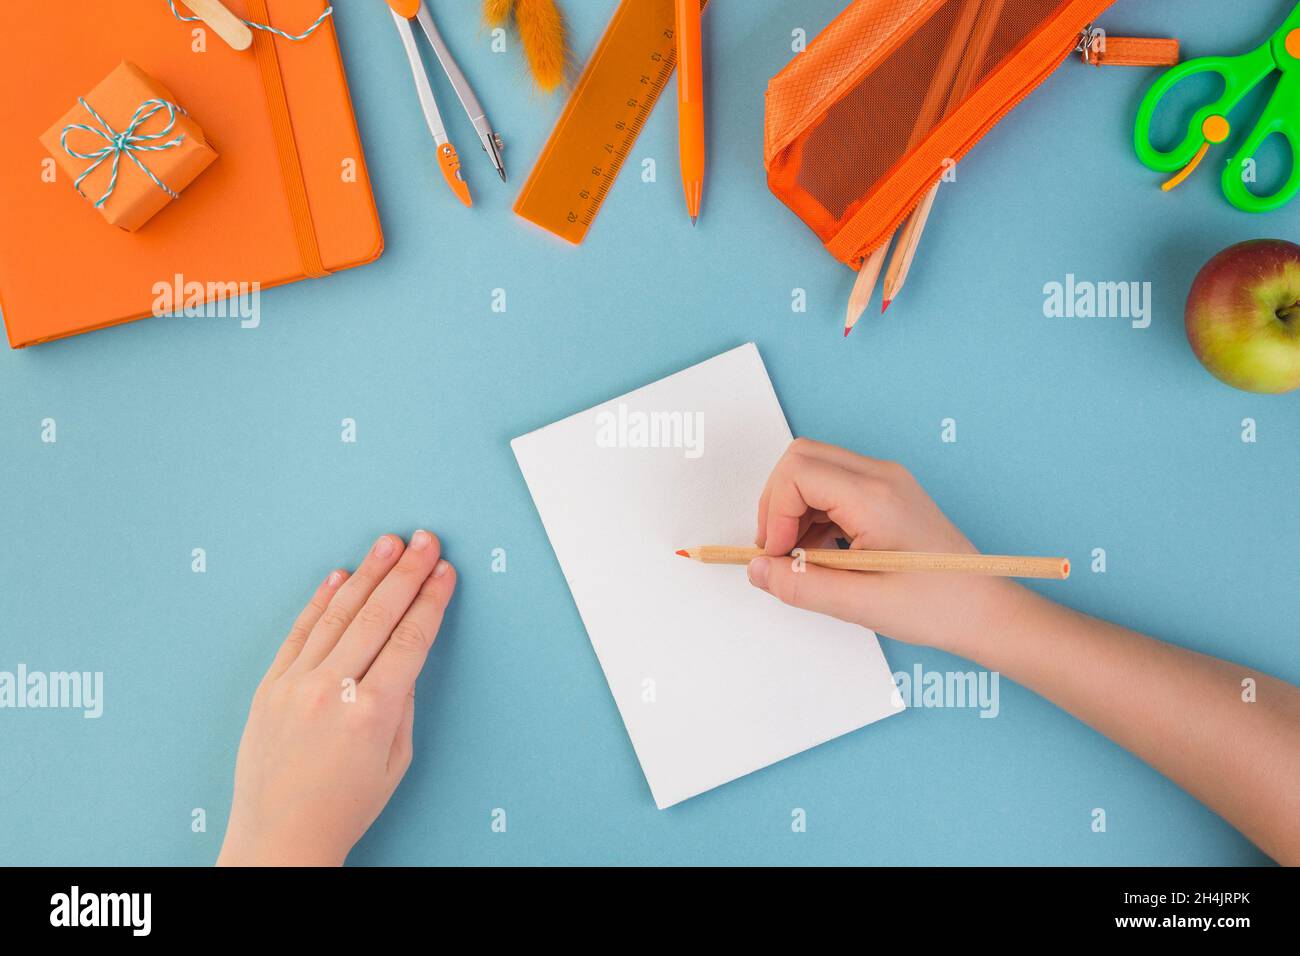 Child hand writes on white peace of paper school or office workspace with orange supplies on blue background. Flat lay. Stock Photo